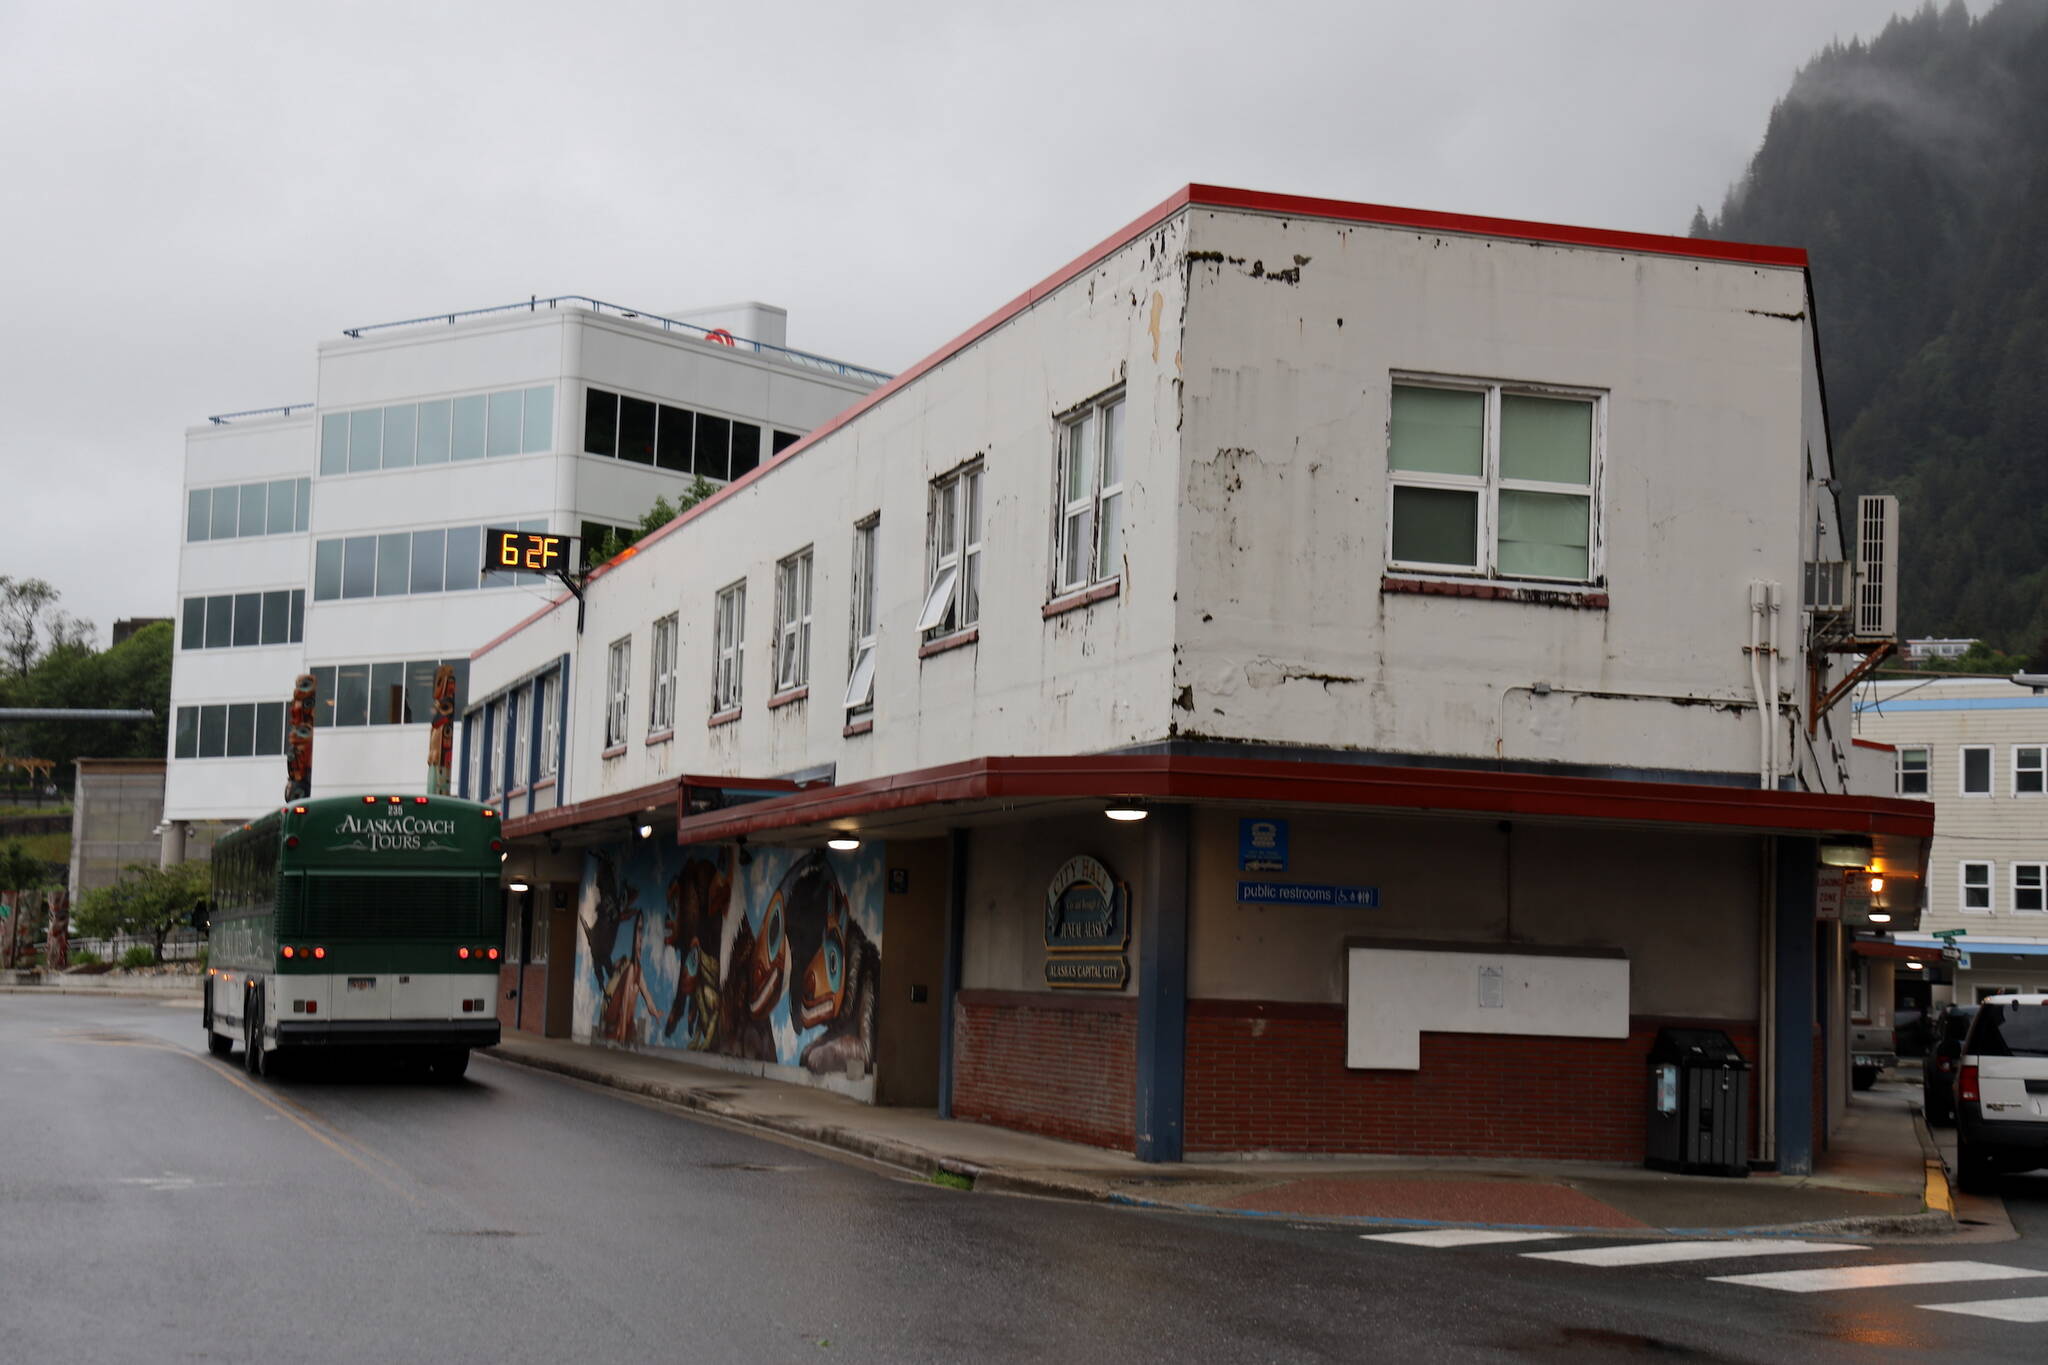 A bus passes by City Hall downtown in late June. The City and Borough of Juneau Assembly passed an ordinance Monday night to put a $27 million bond proposition for a new City Hall on the fall municipal election ballot. (Clarise Larson / Juneau Empire File)